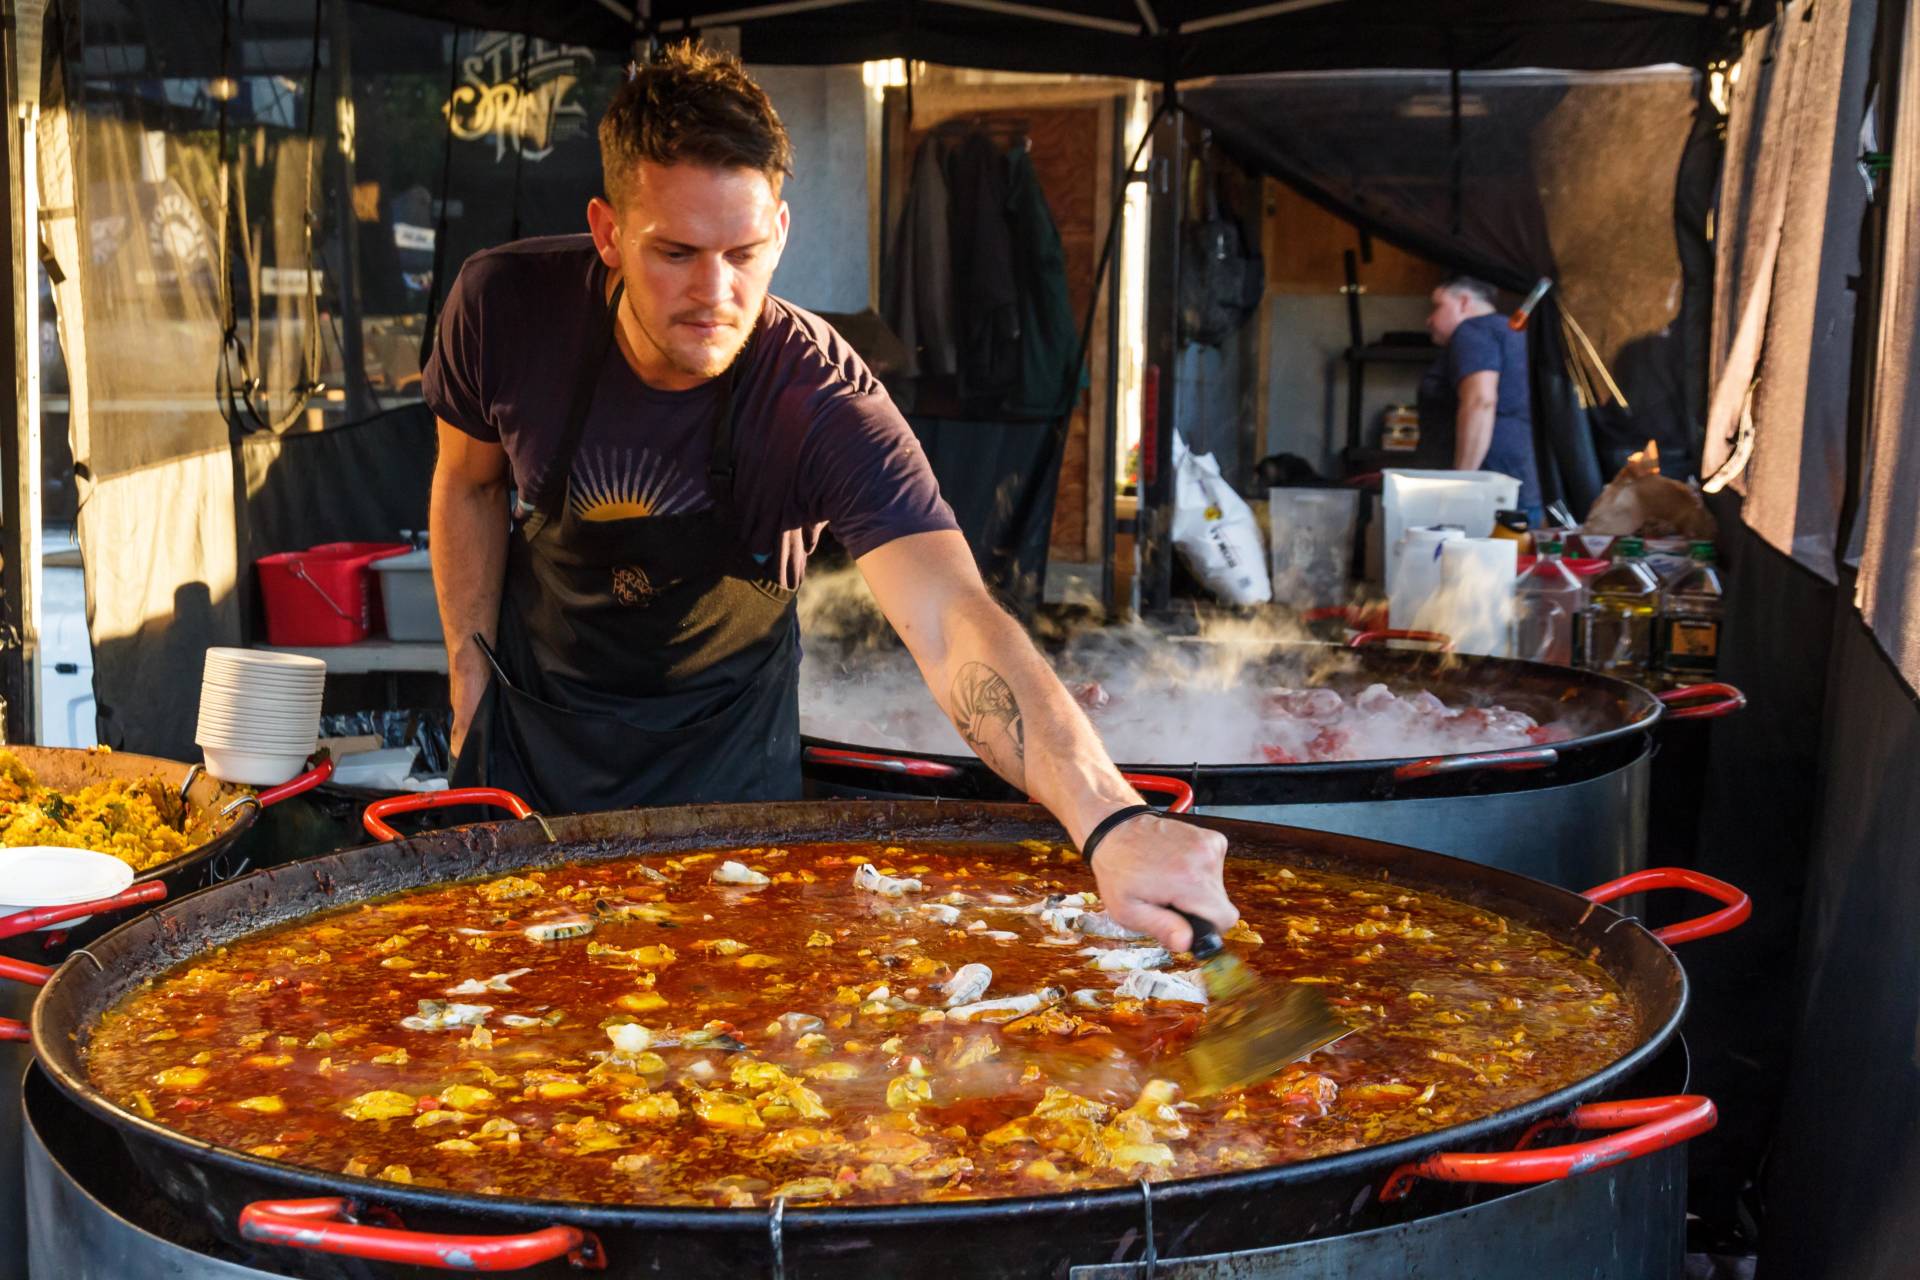 The Eat Real Festival knows how to feed a crowd.